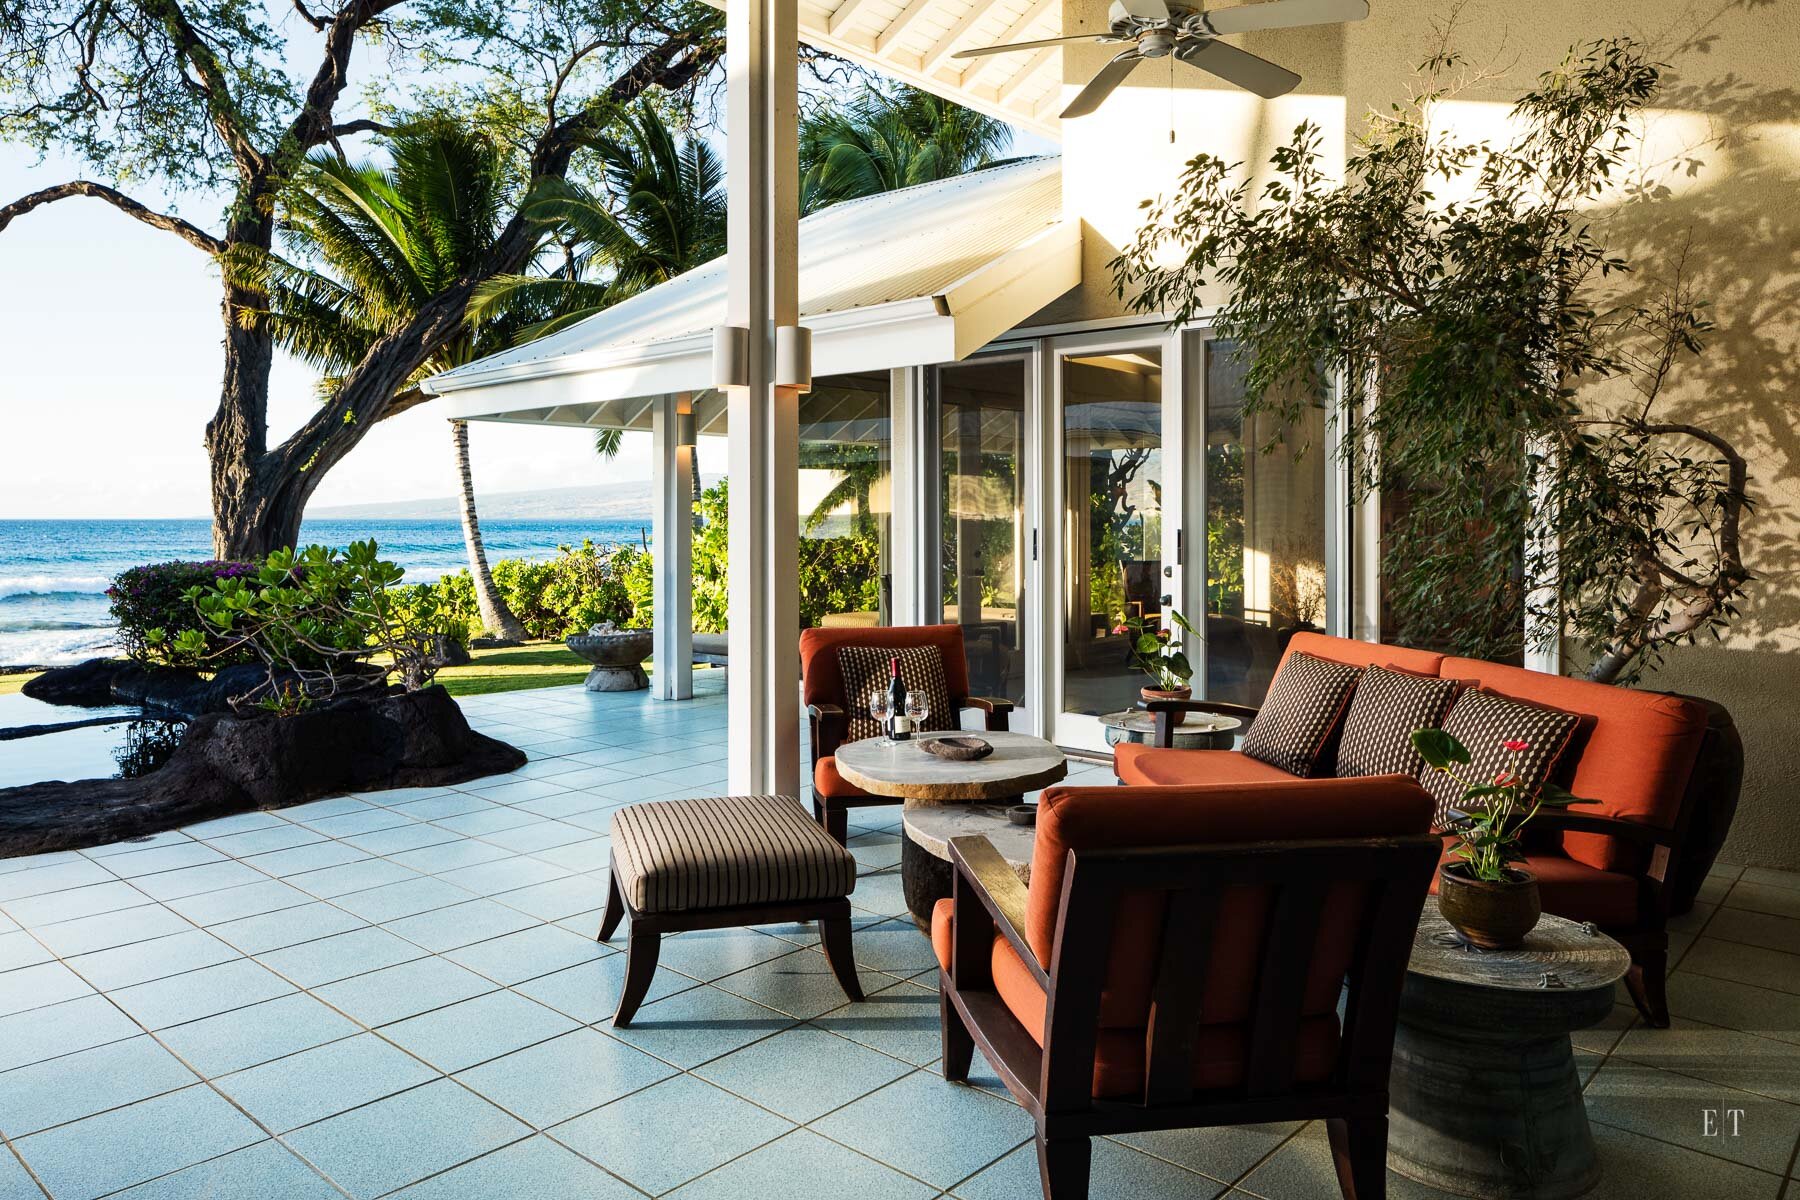  Outdoor Living on the Lanai 